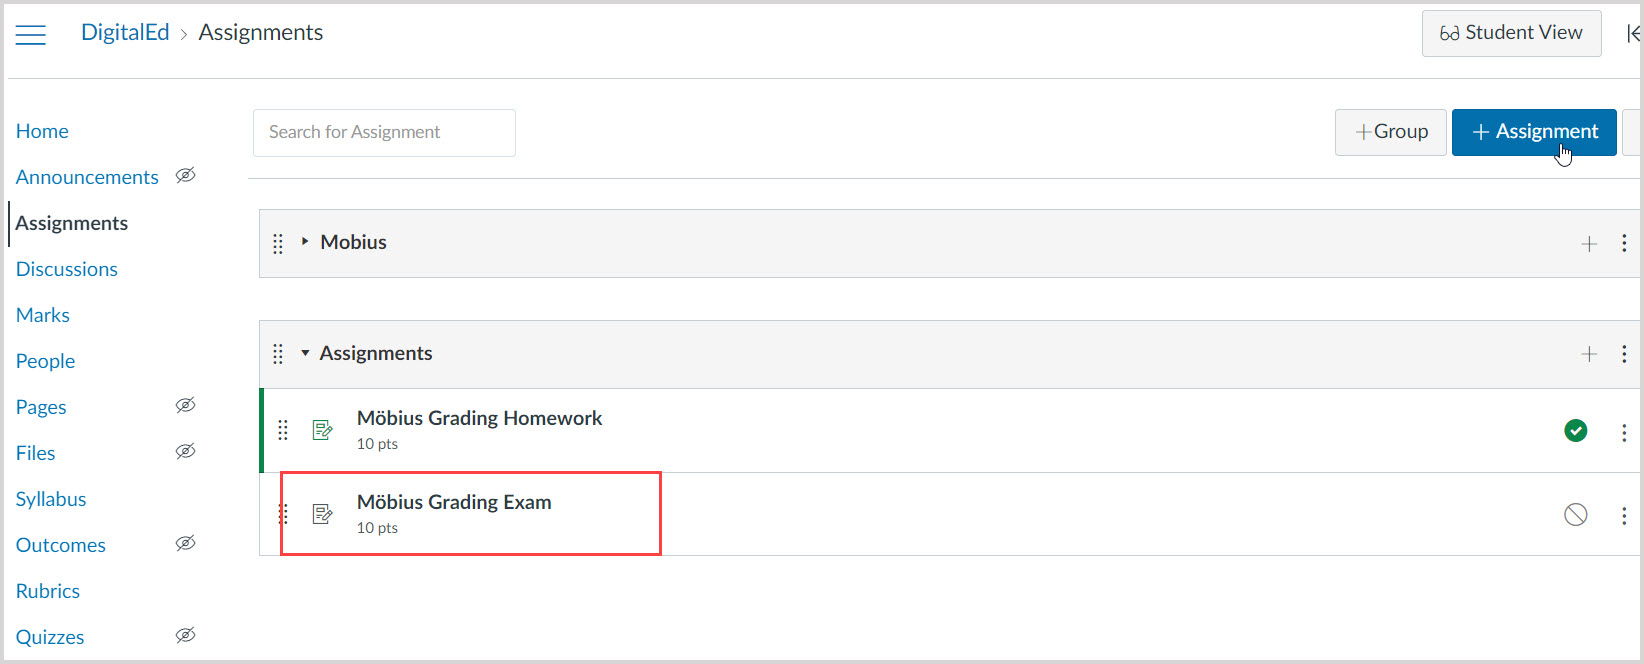 Canvas Assignments page with a link called Mobius Grading Exam.